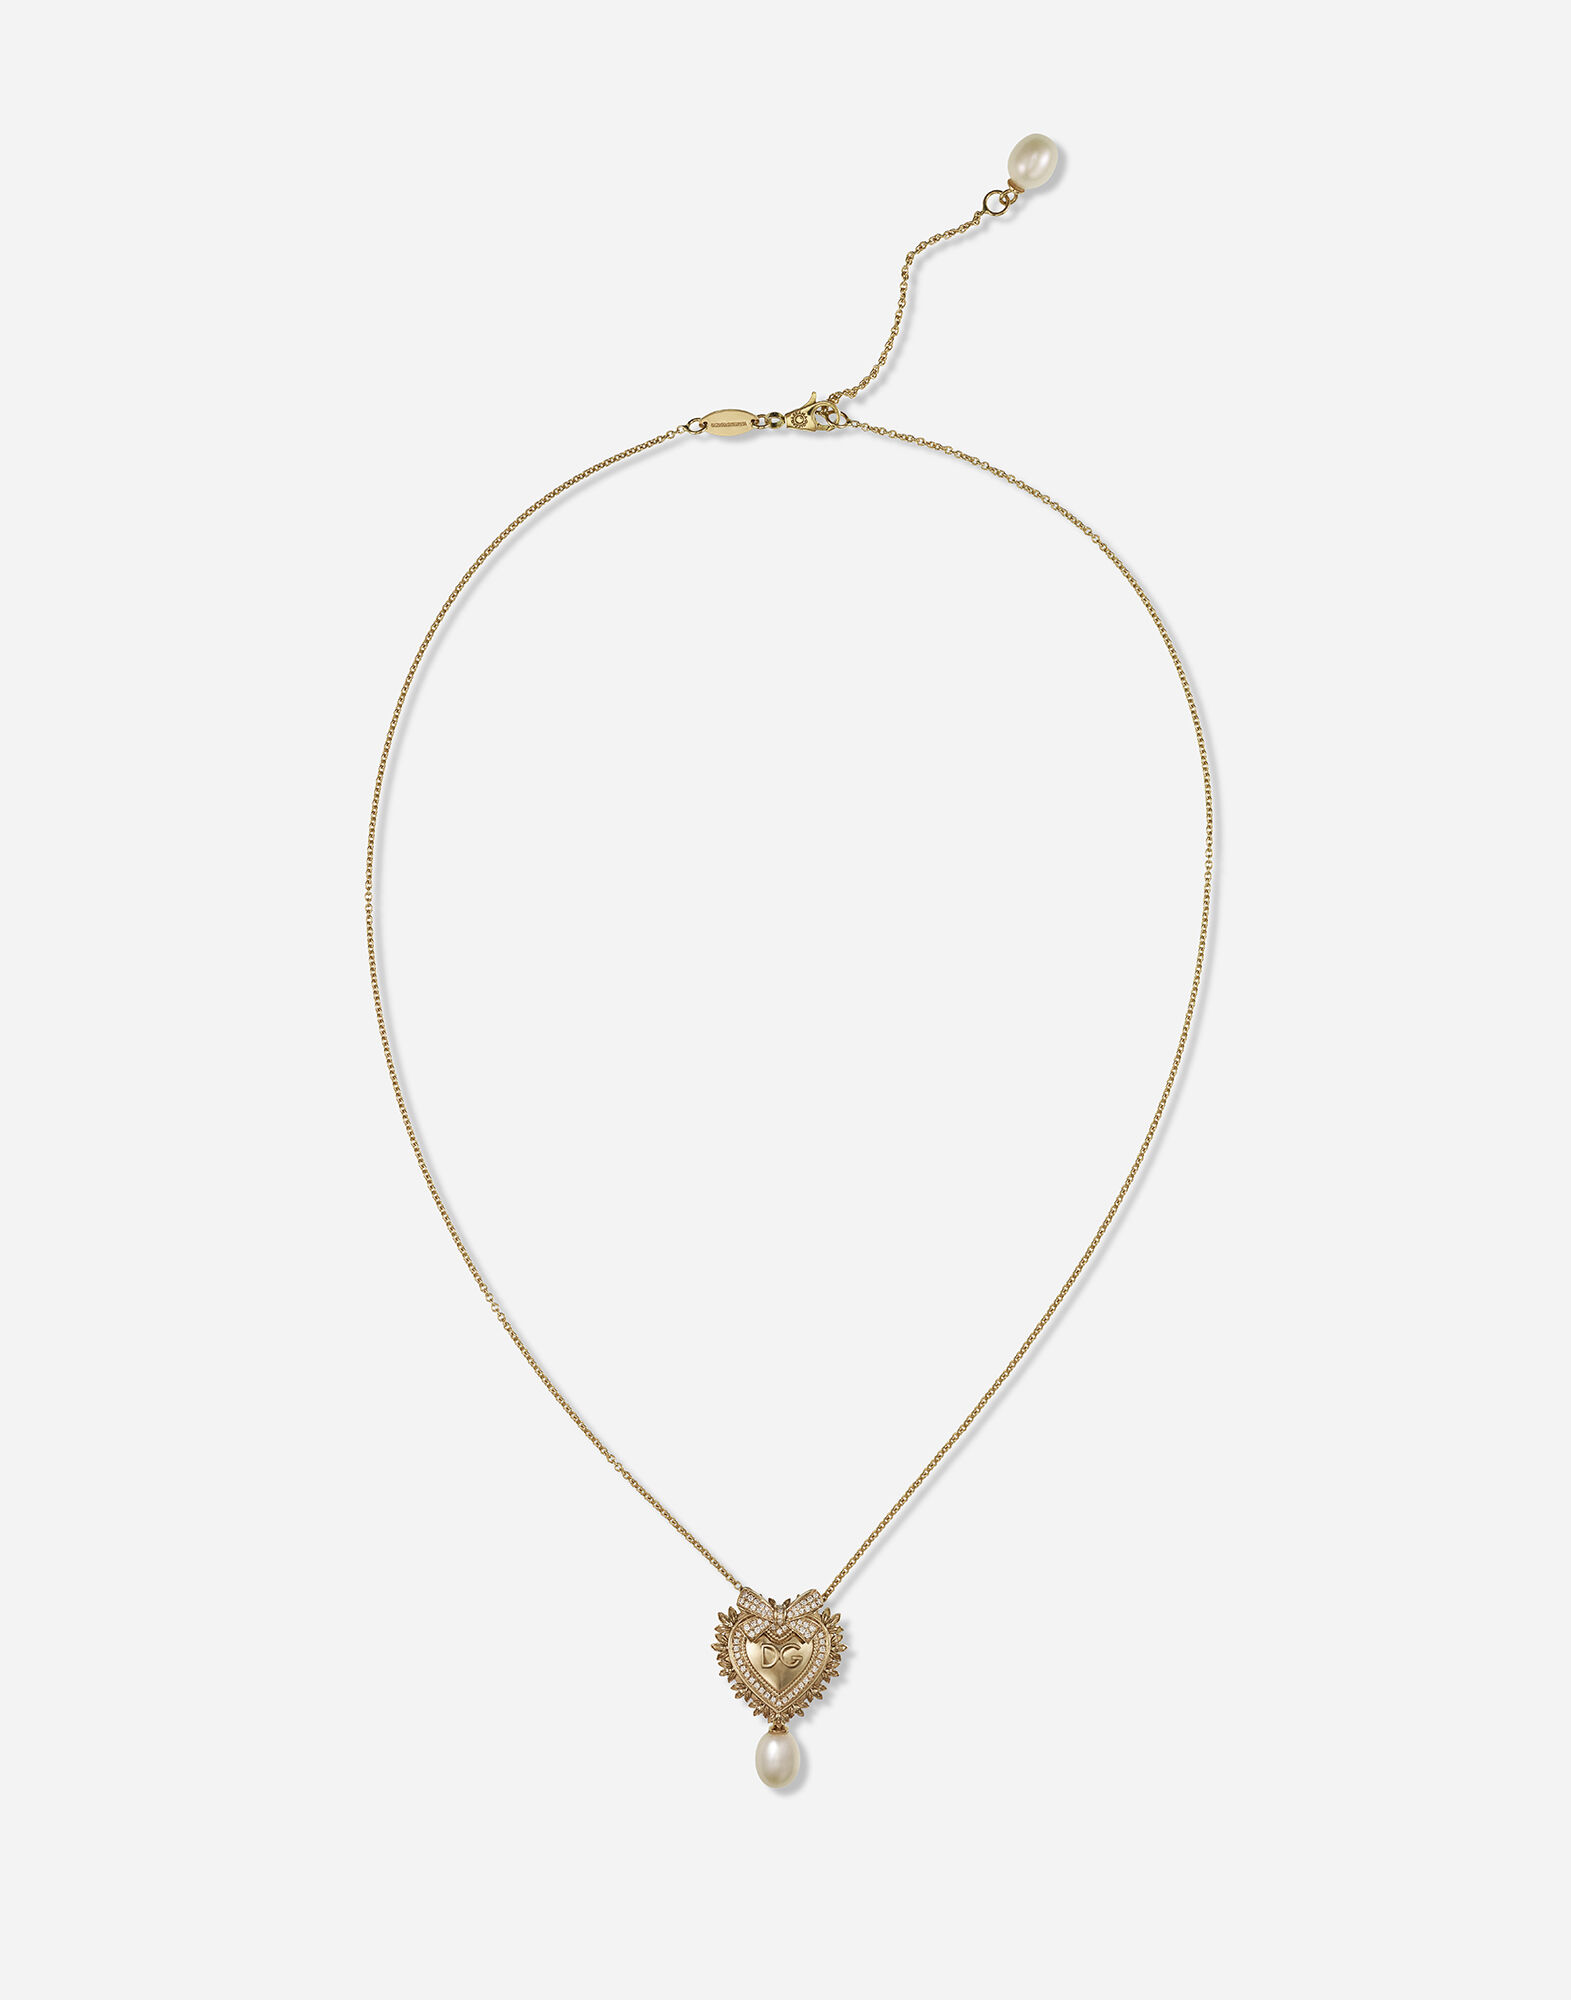 Dolce&Gabbana Devotion necklace in yellow gold with diamonds and pearls Gold WBP6C1W1111